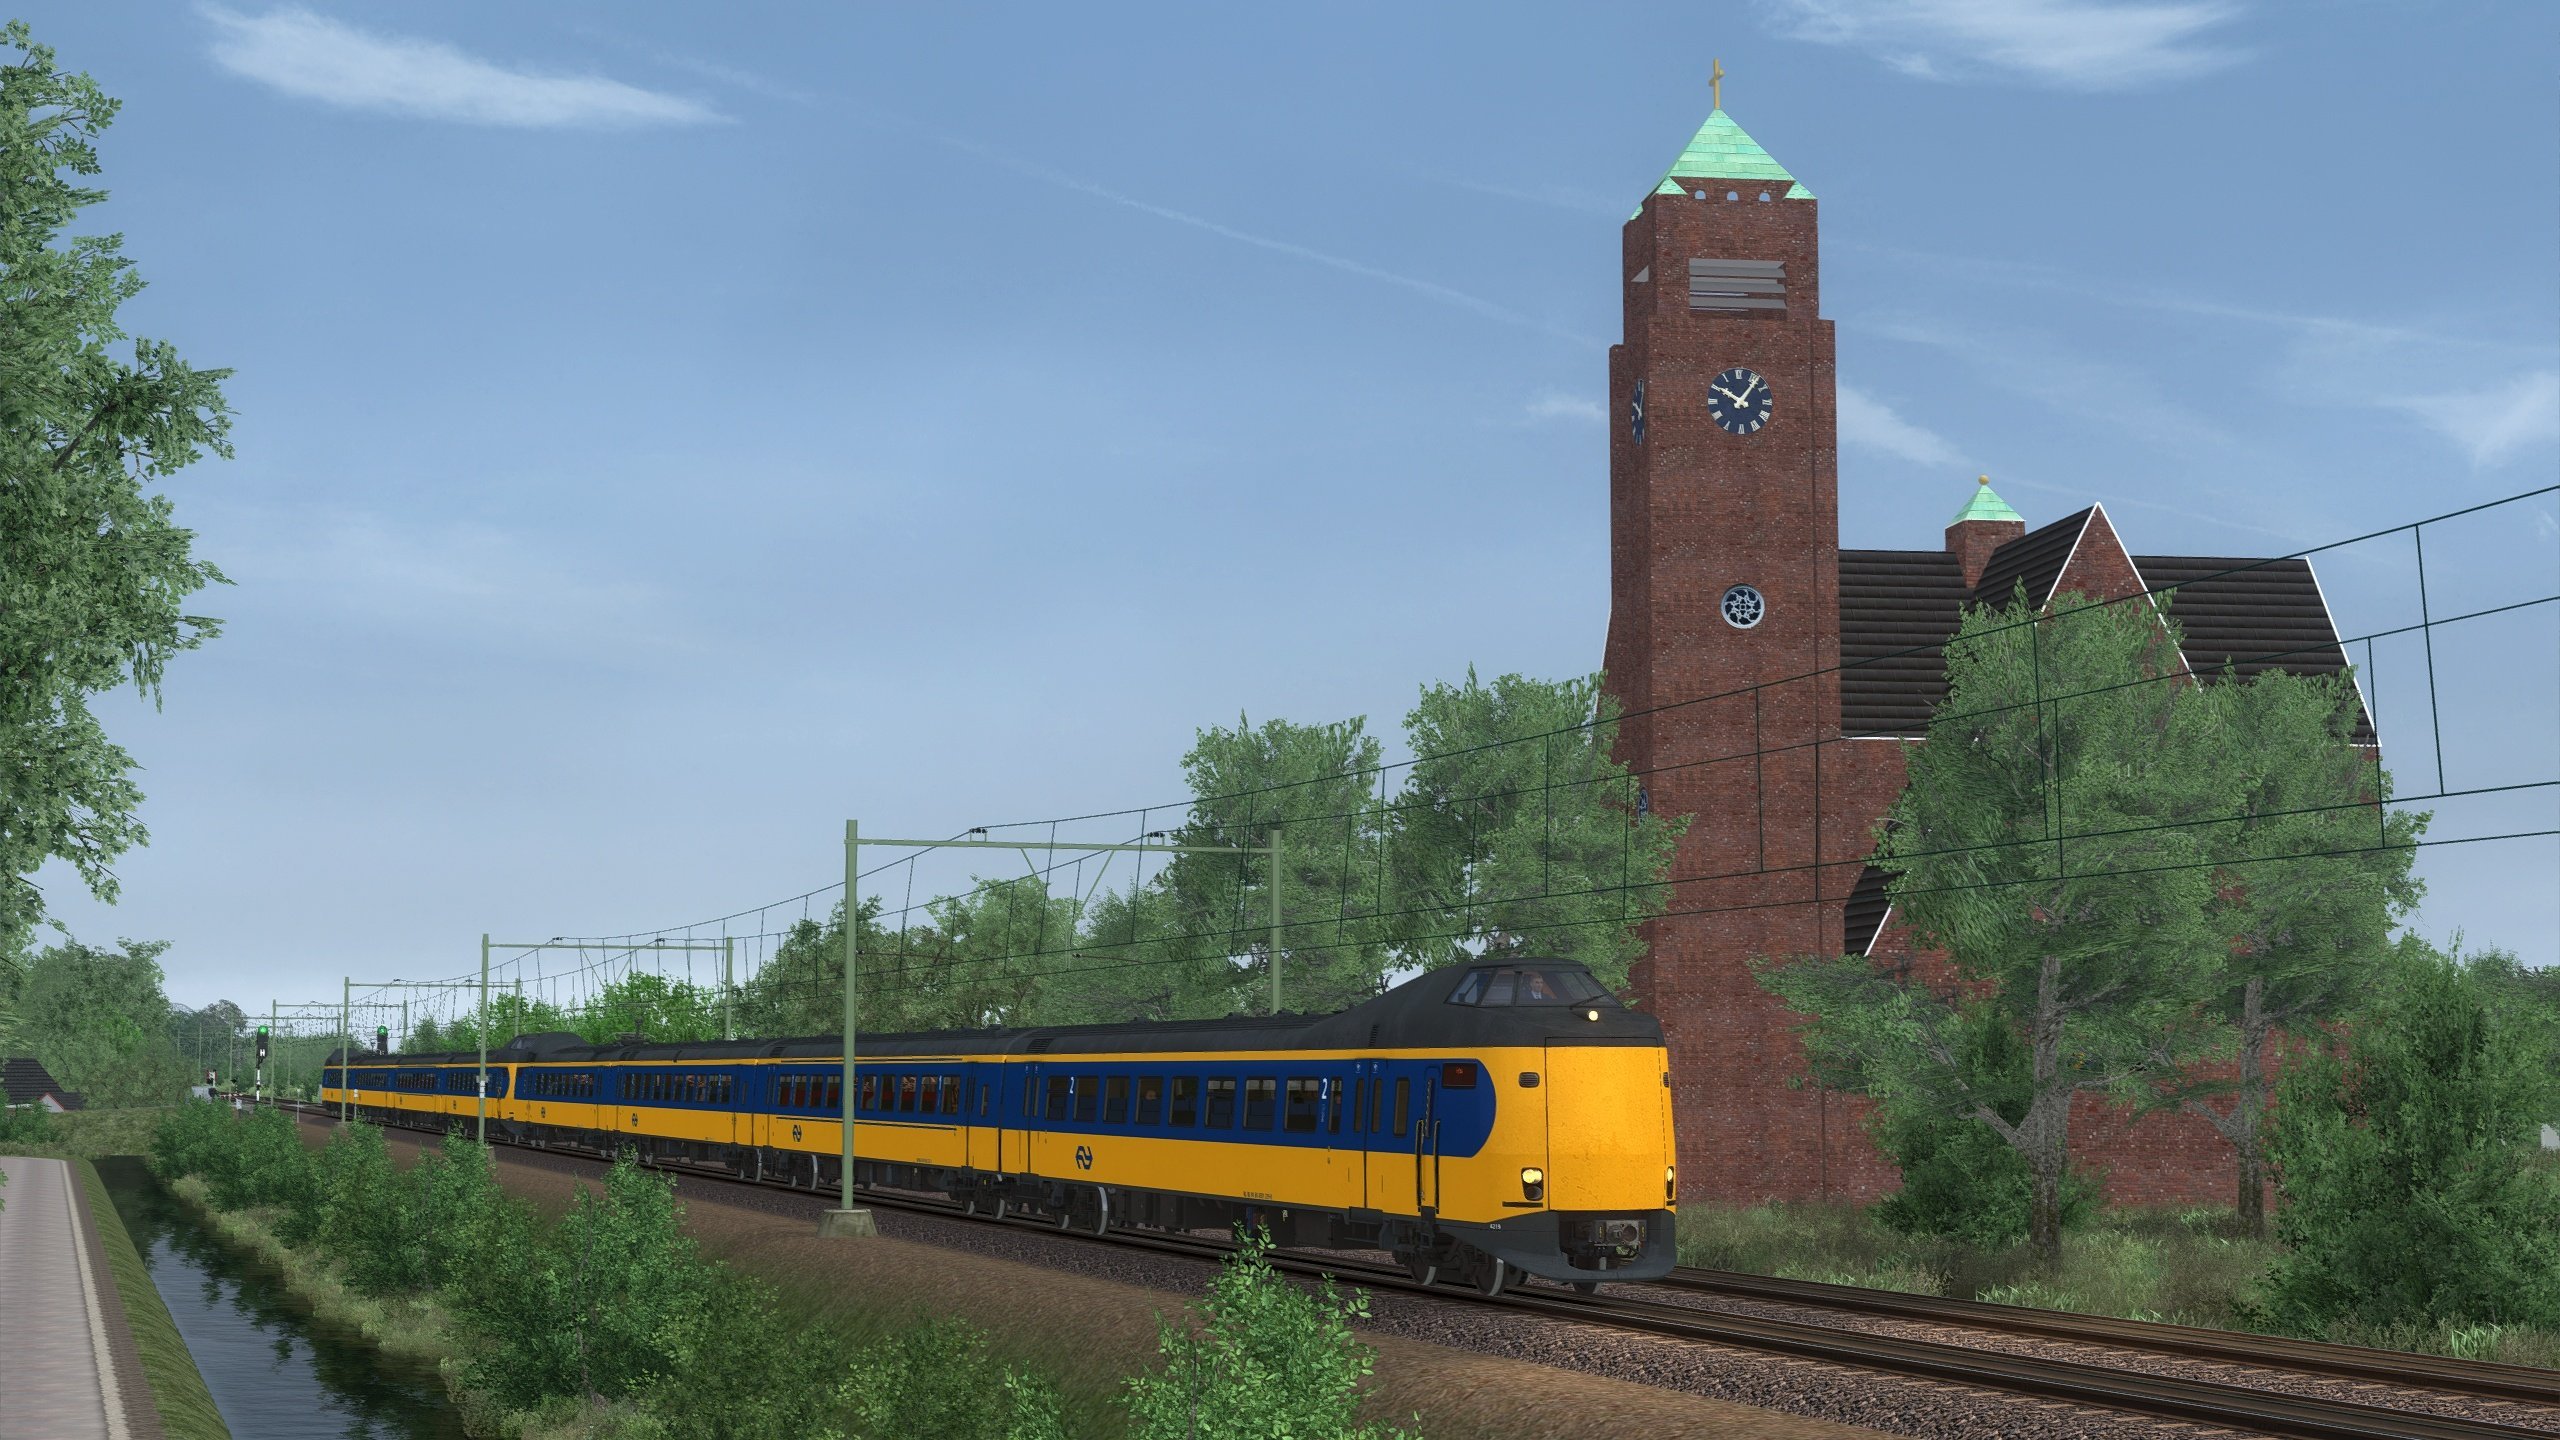 IC 3537 on its way to Venlo